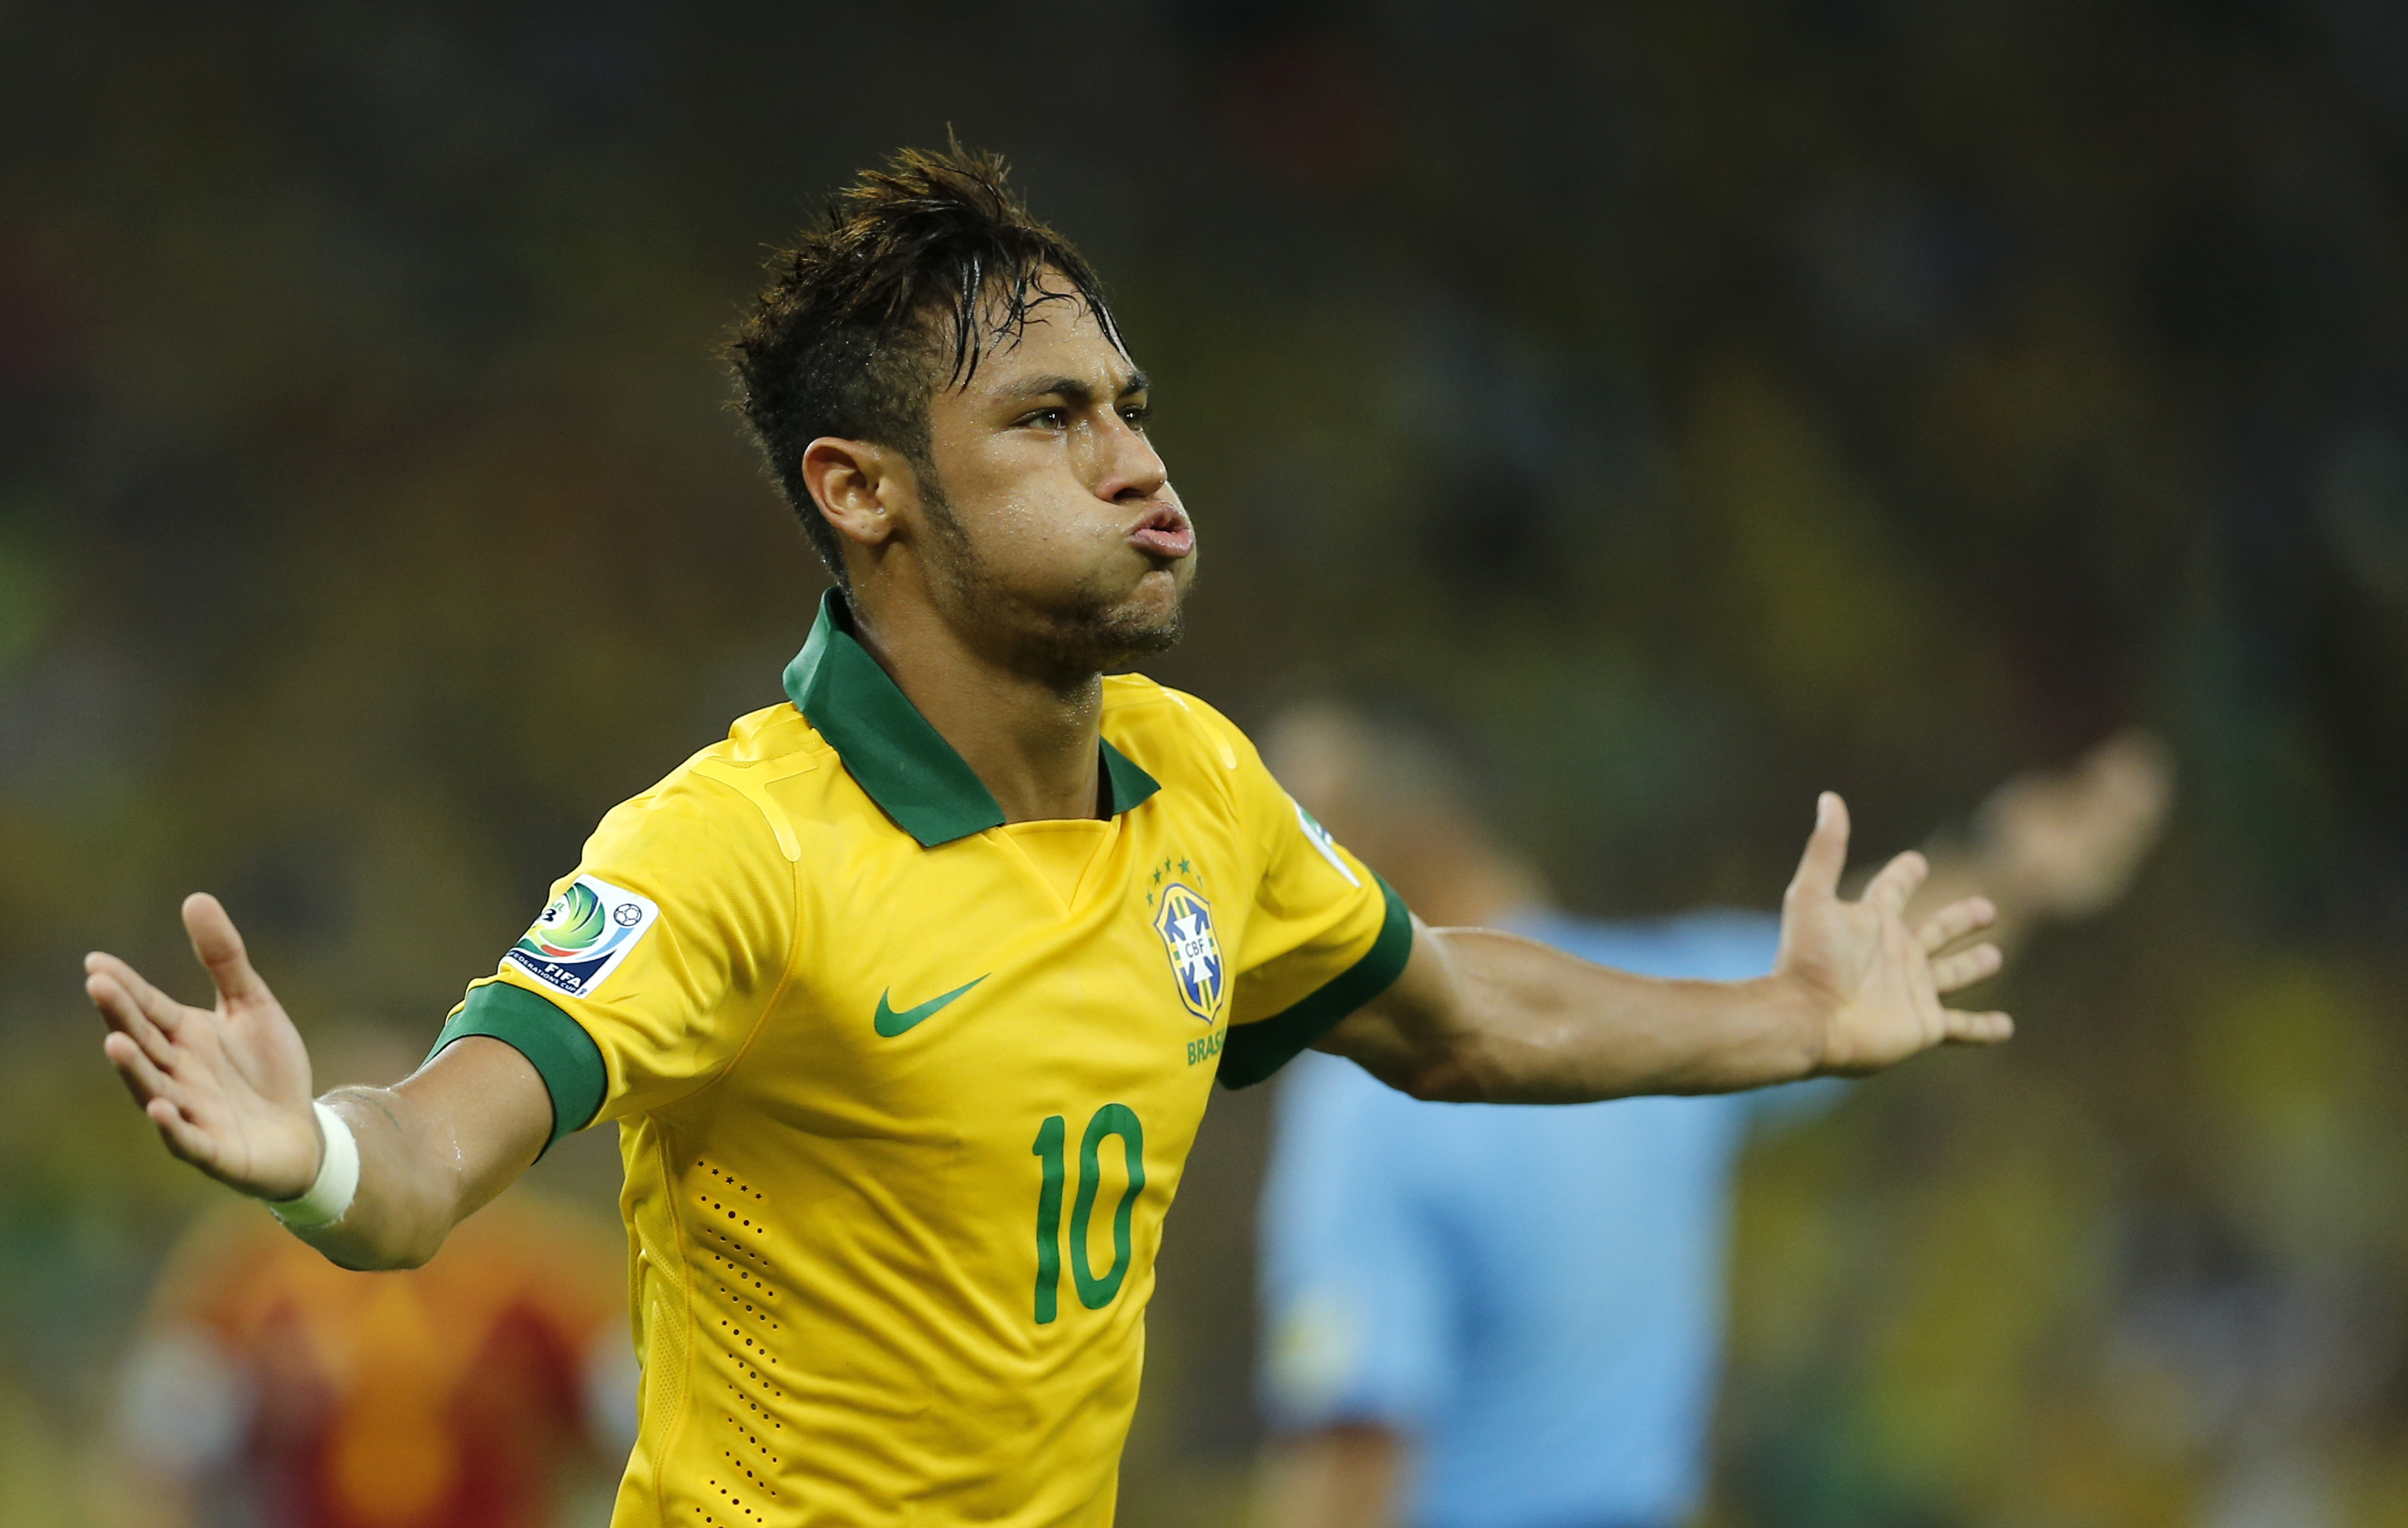 260+ Neymar HD Wallpapers and Backgrounds